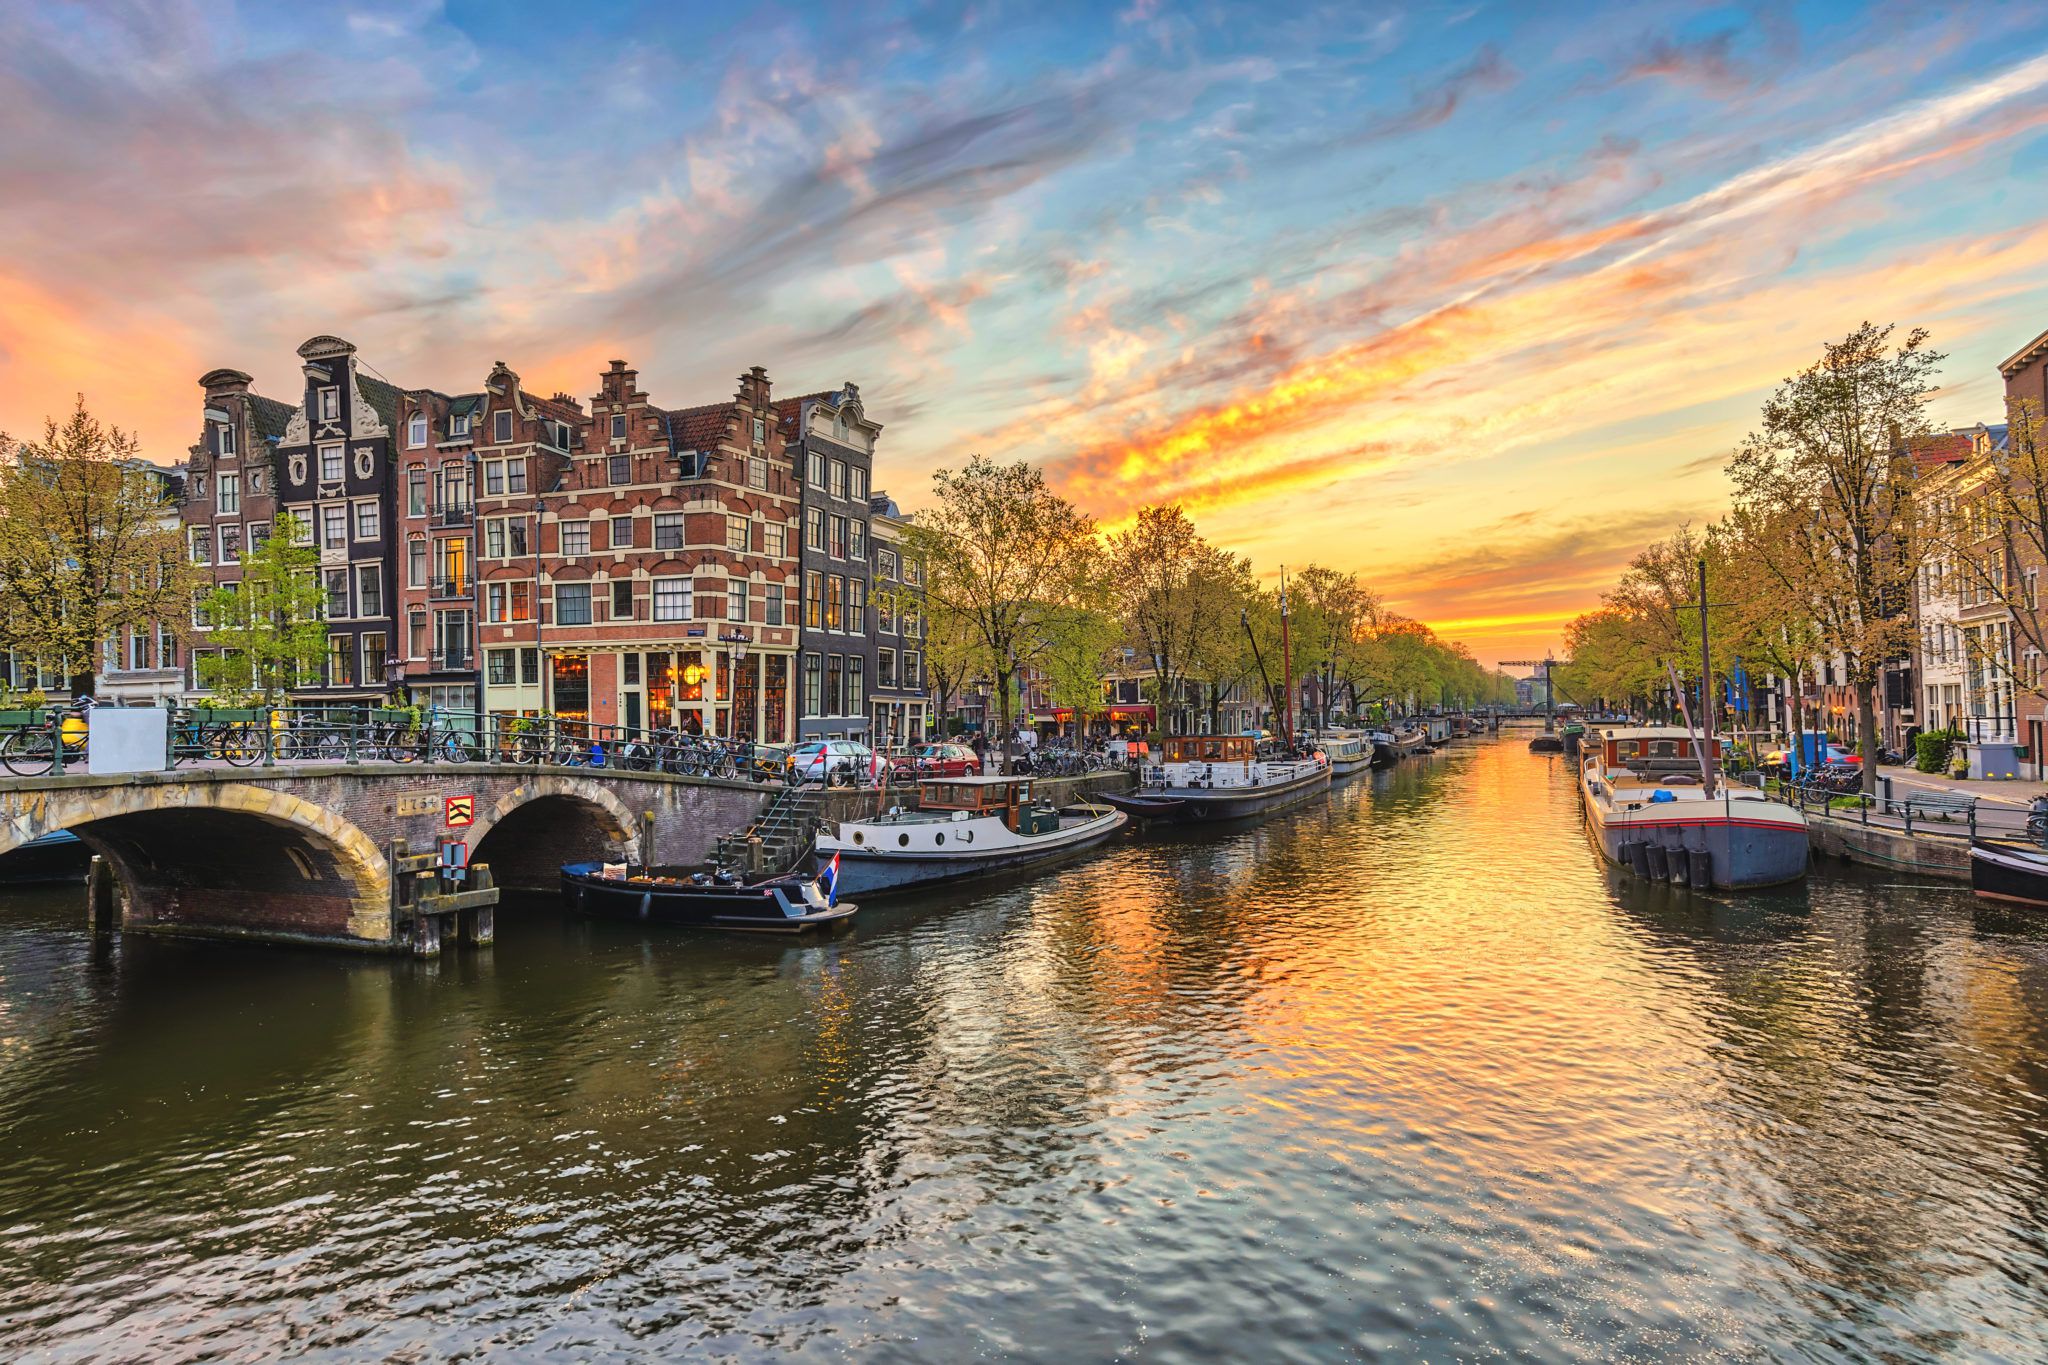 Netherlands Ranked Among Top 10 Best Countries Globally for Expats